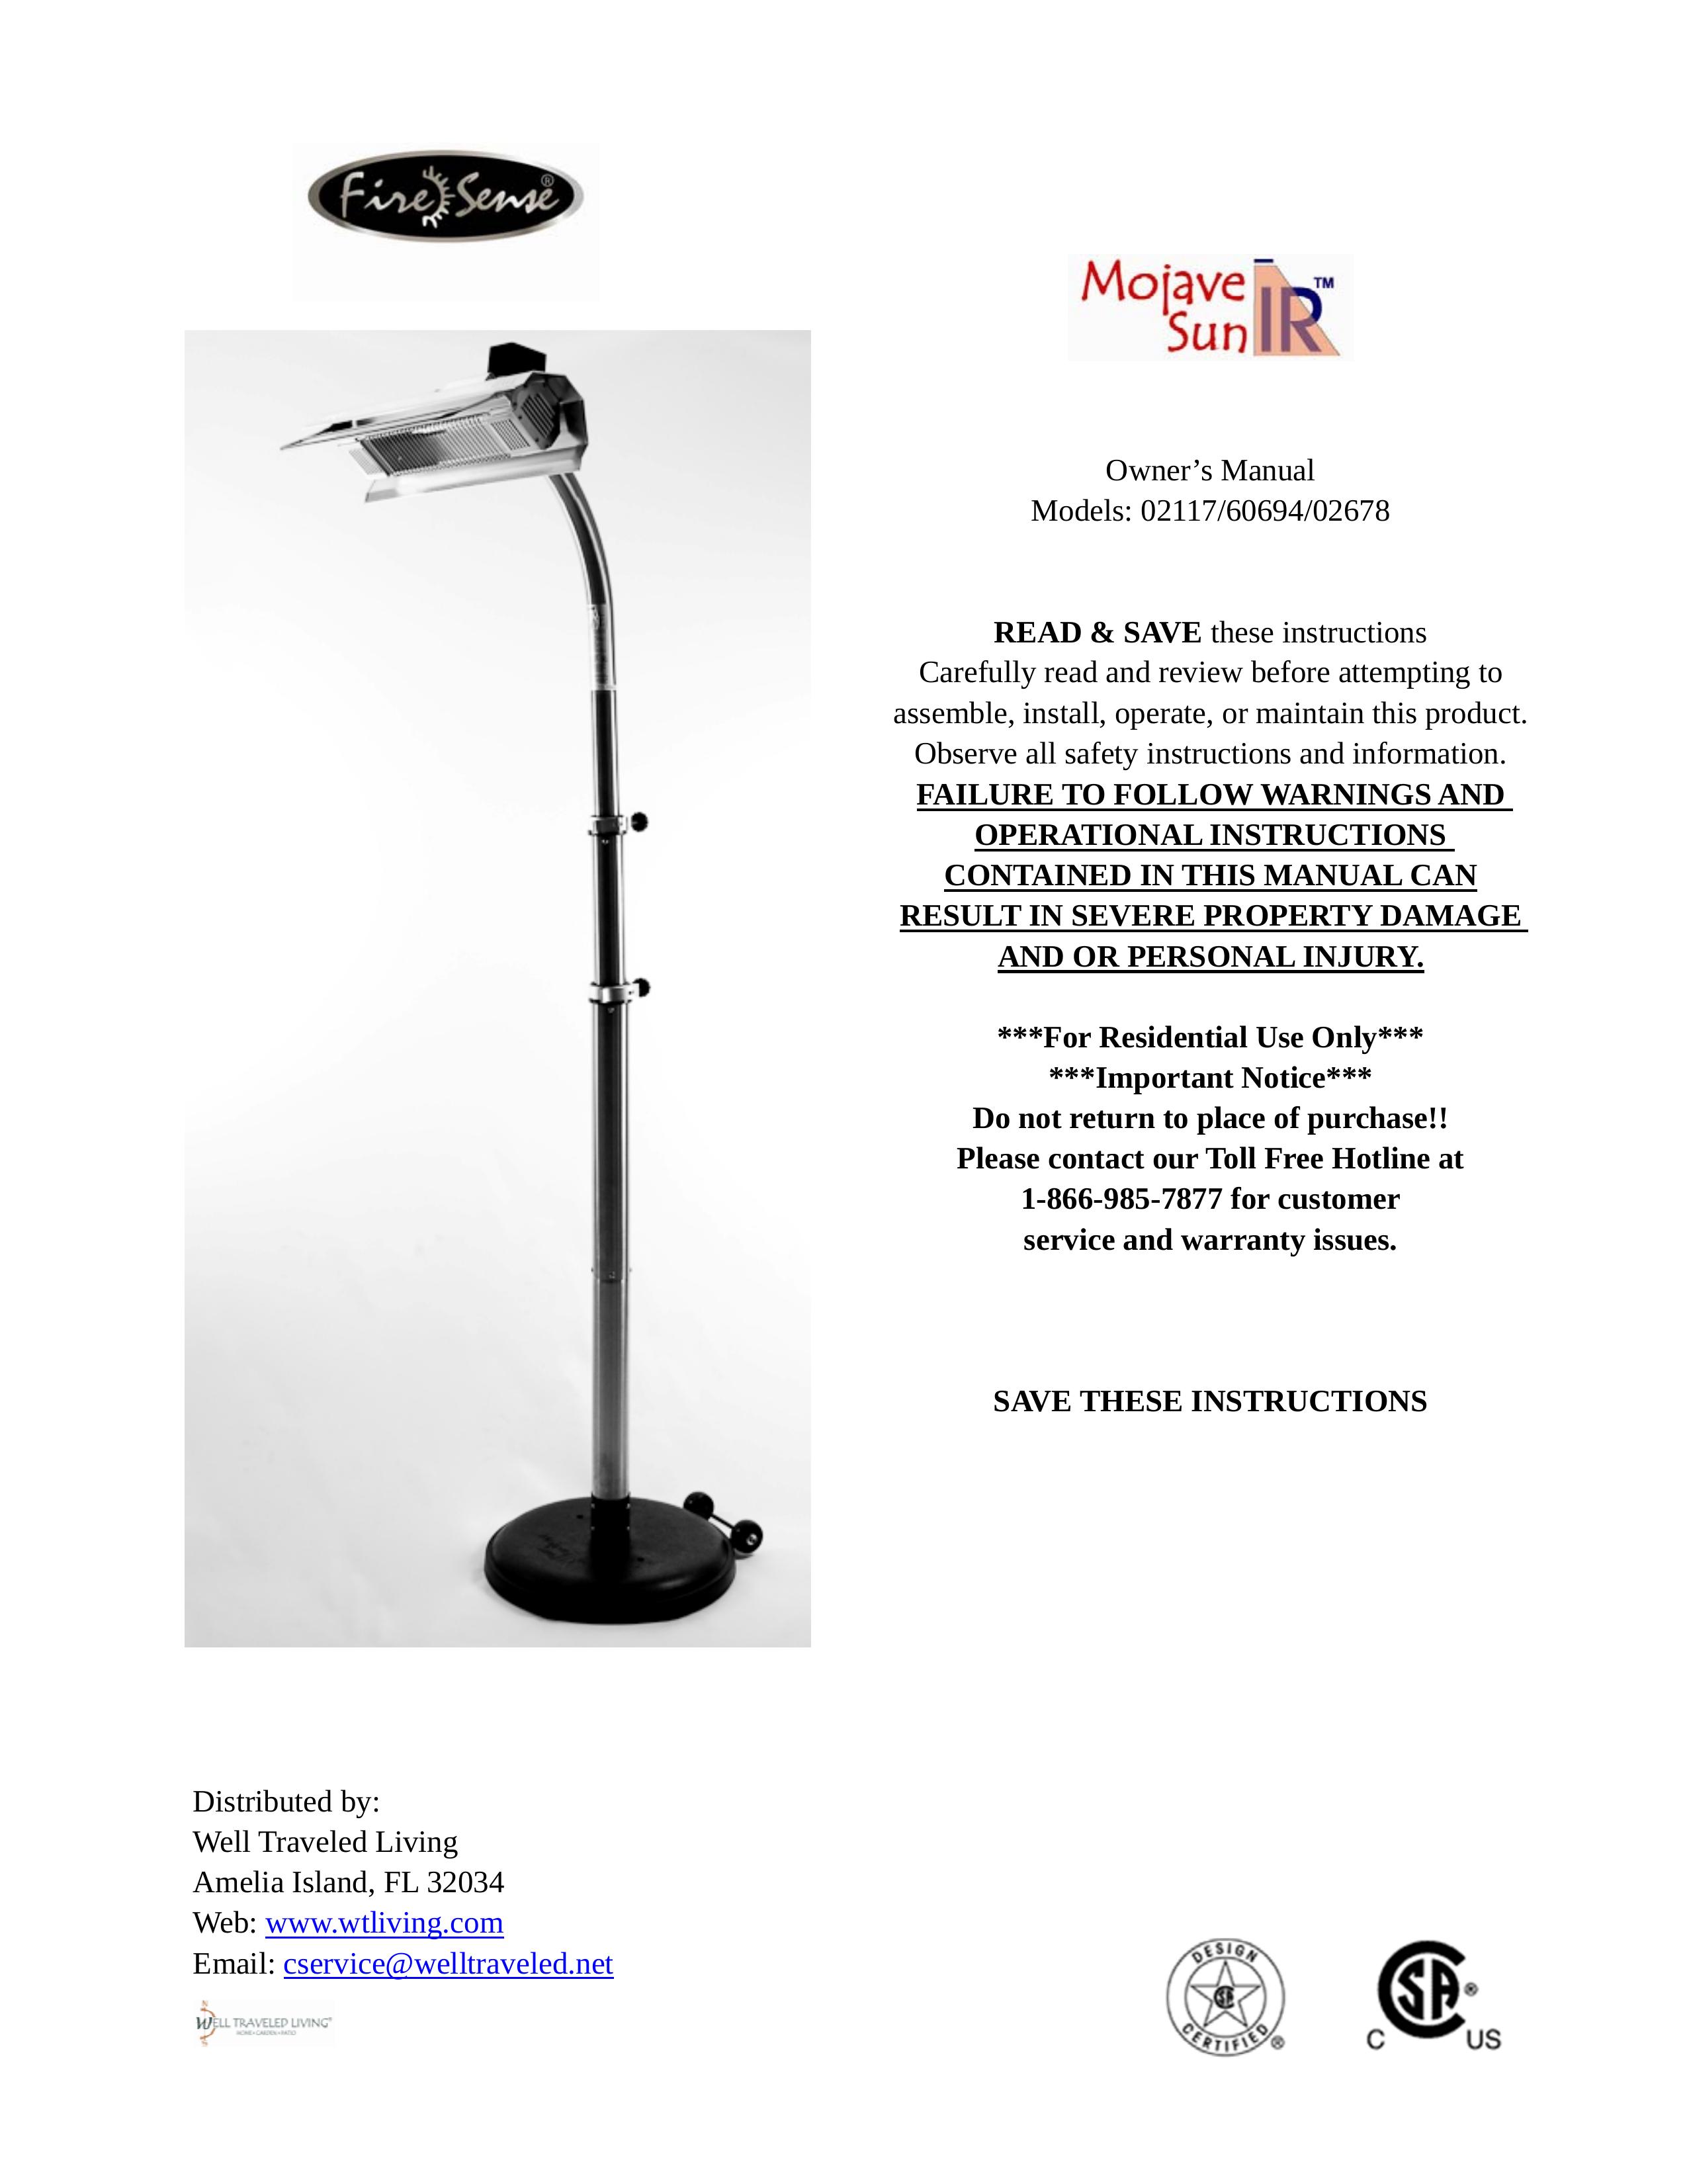 Well Traveled Living 02678 Patio Heater User Manual